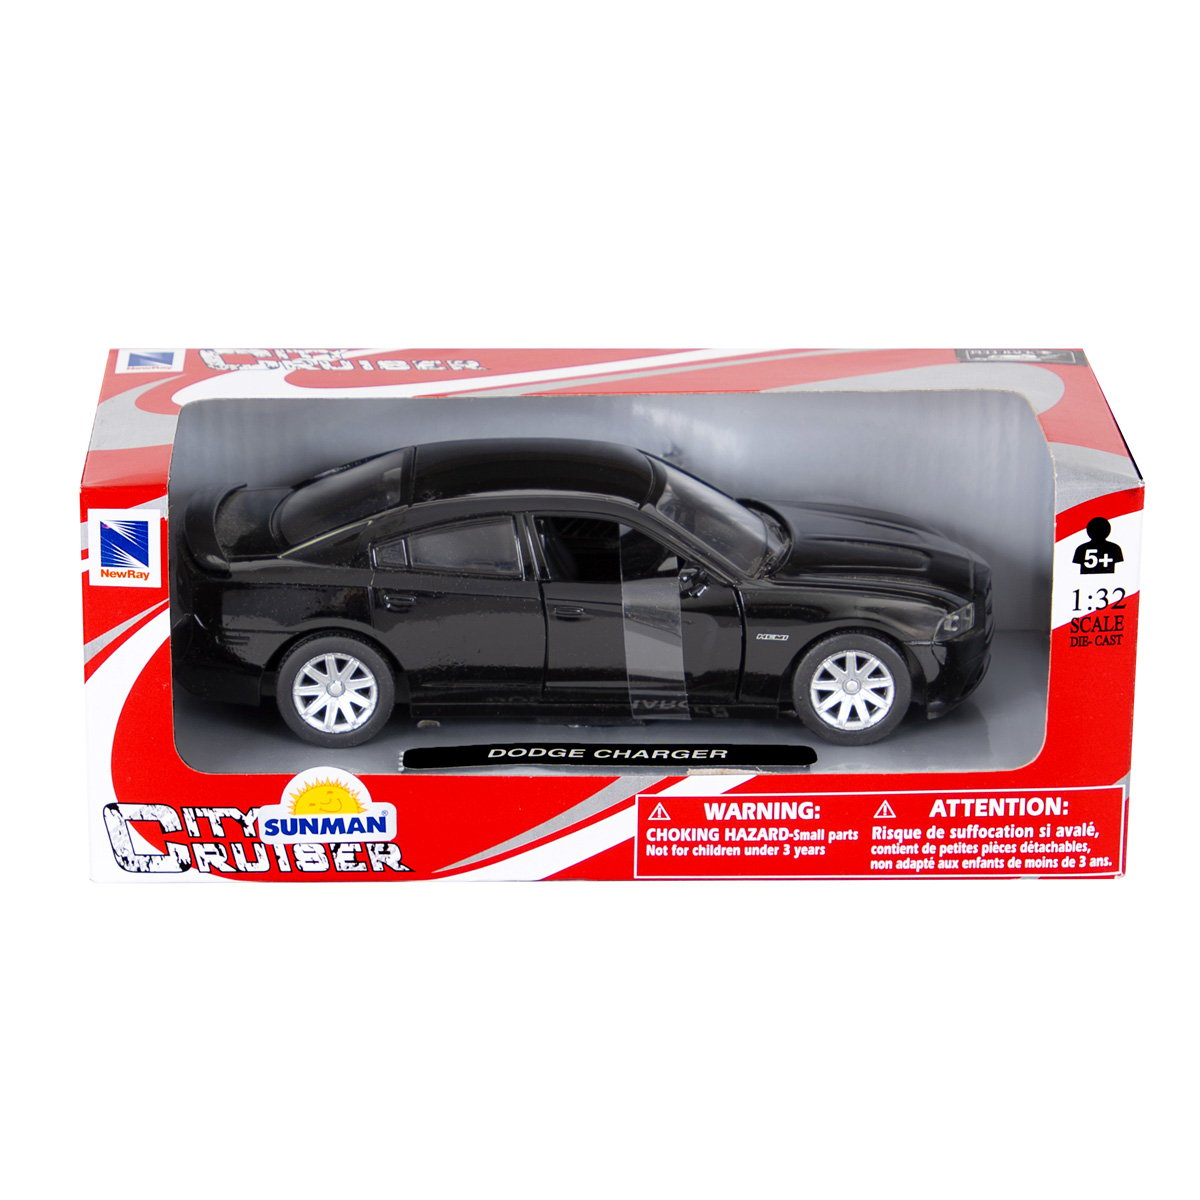 Masina sport metalica, New Ray, Dodge Charger, 1:32